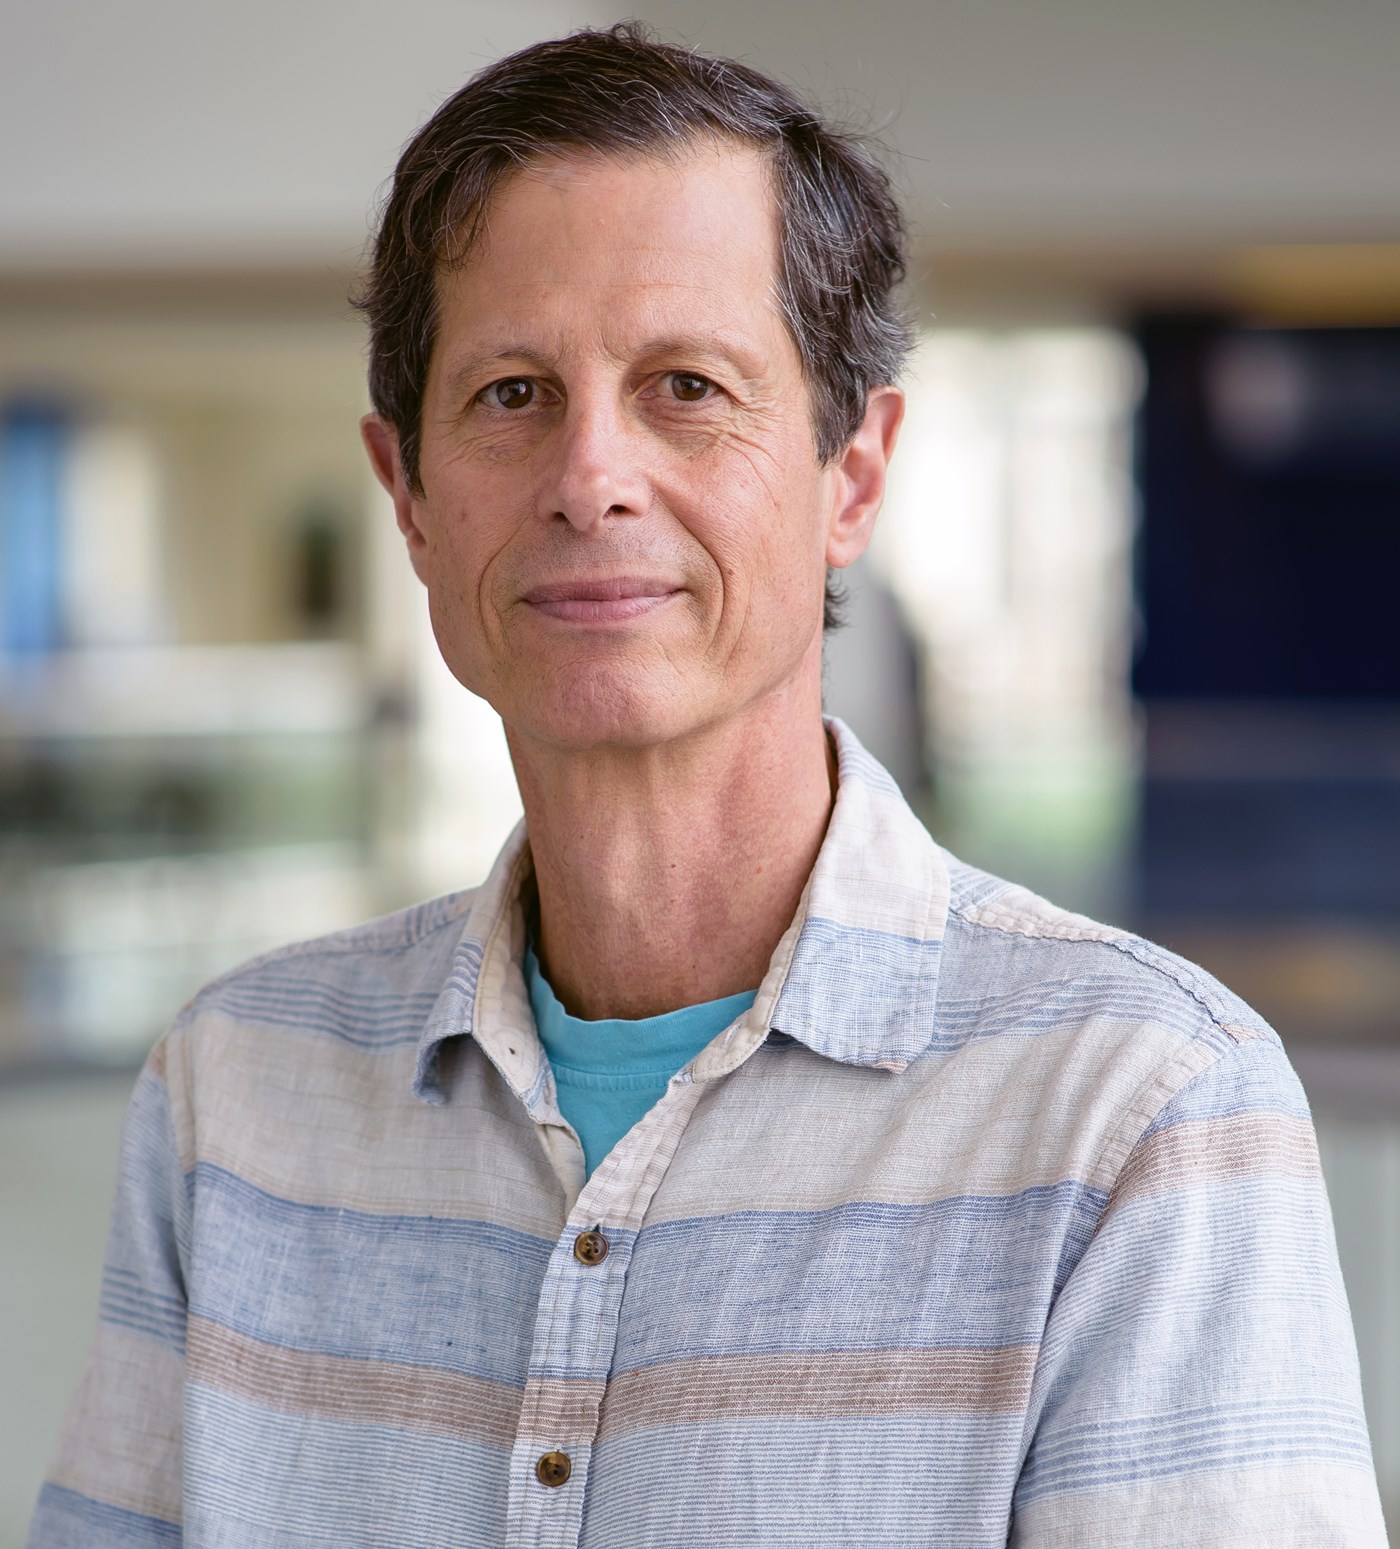 George Chigas, Ph.D. is Associate Teaching Professor in Asian Studies in the World Languages & Cultures department at UMass Lowell.